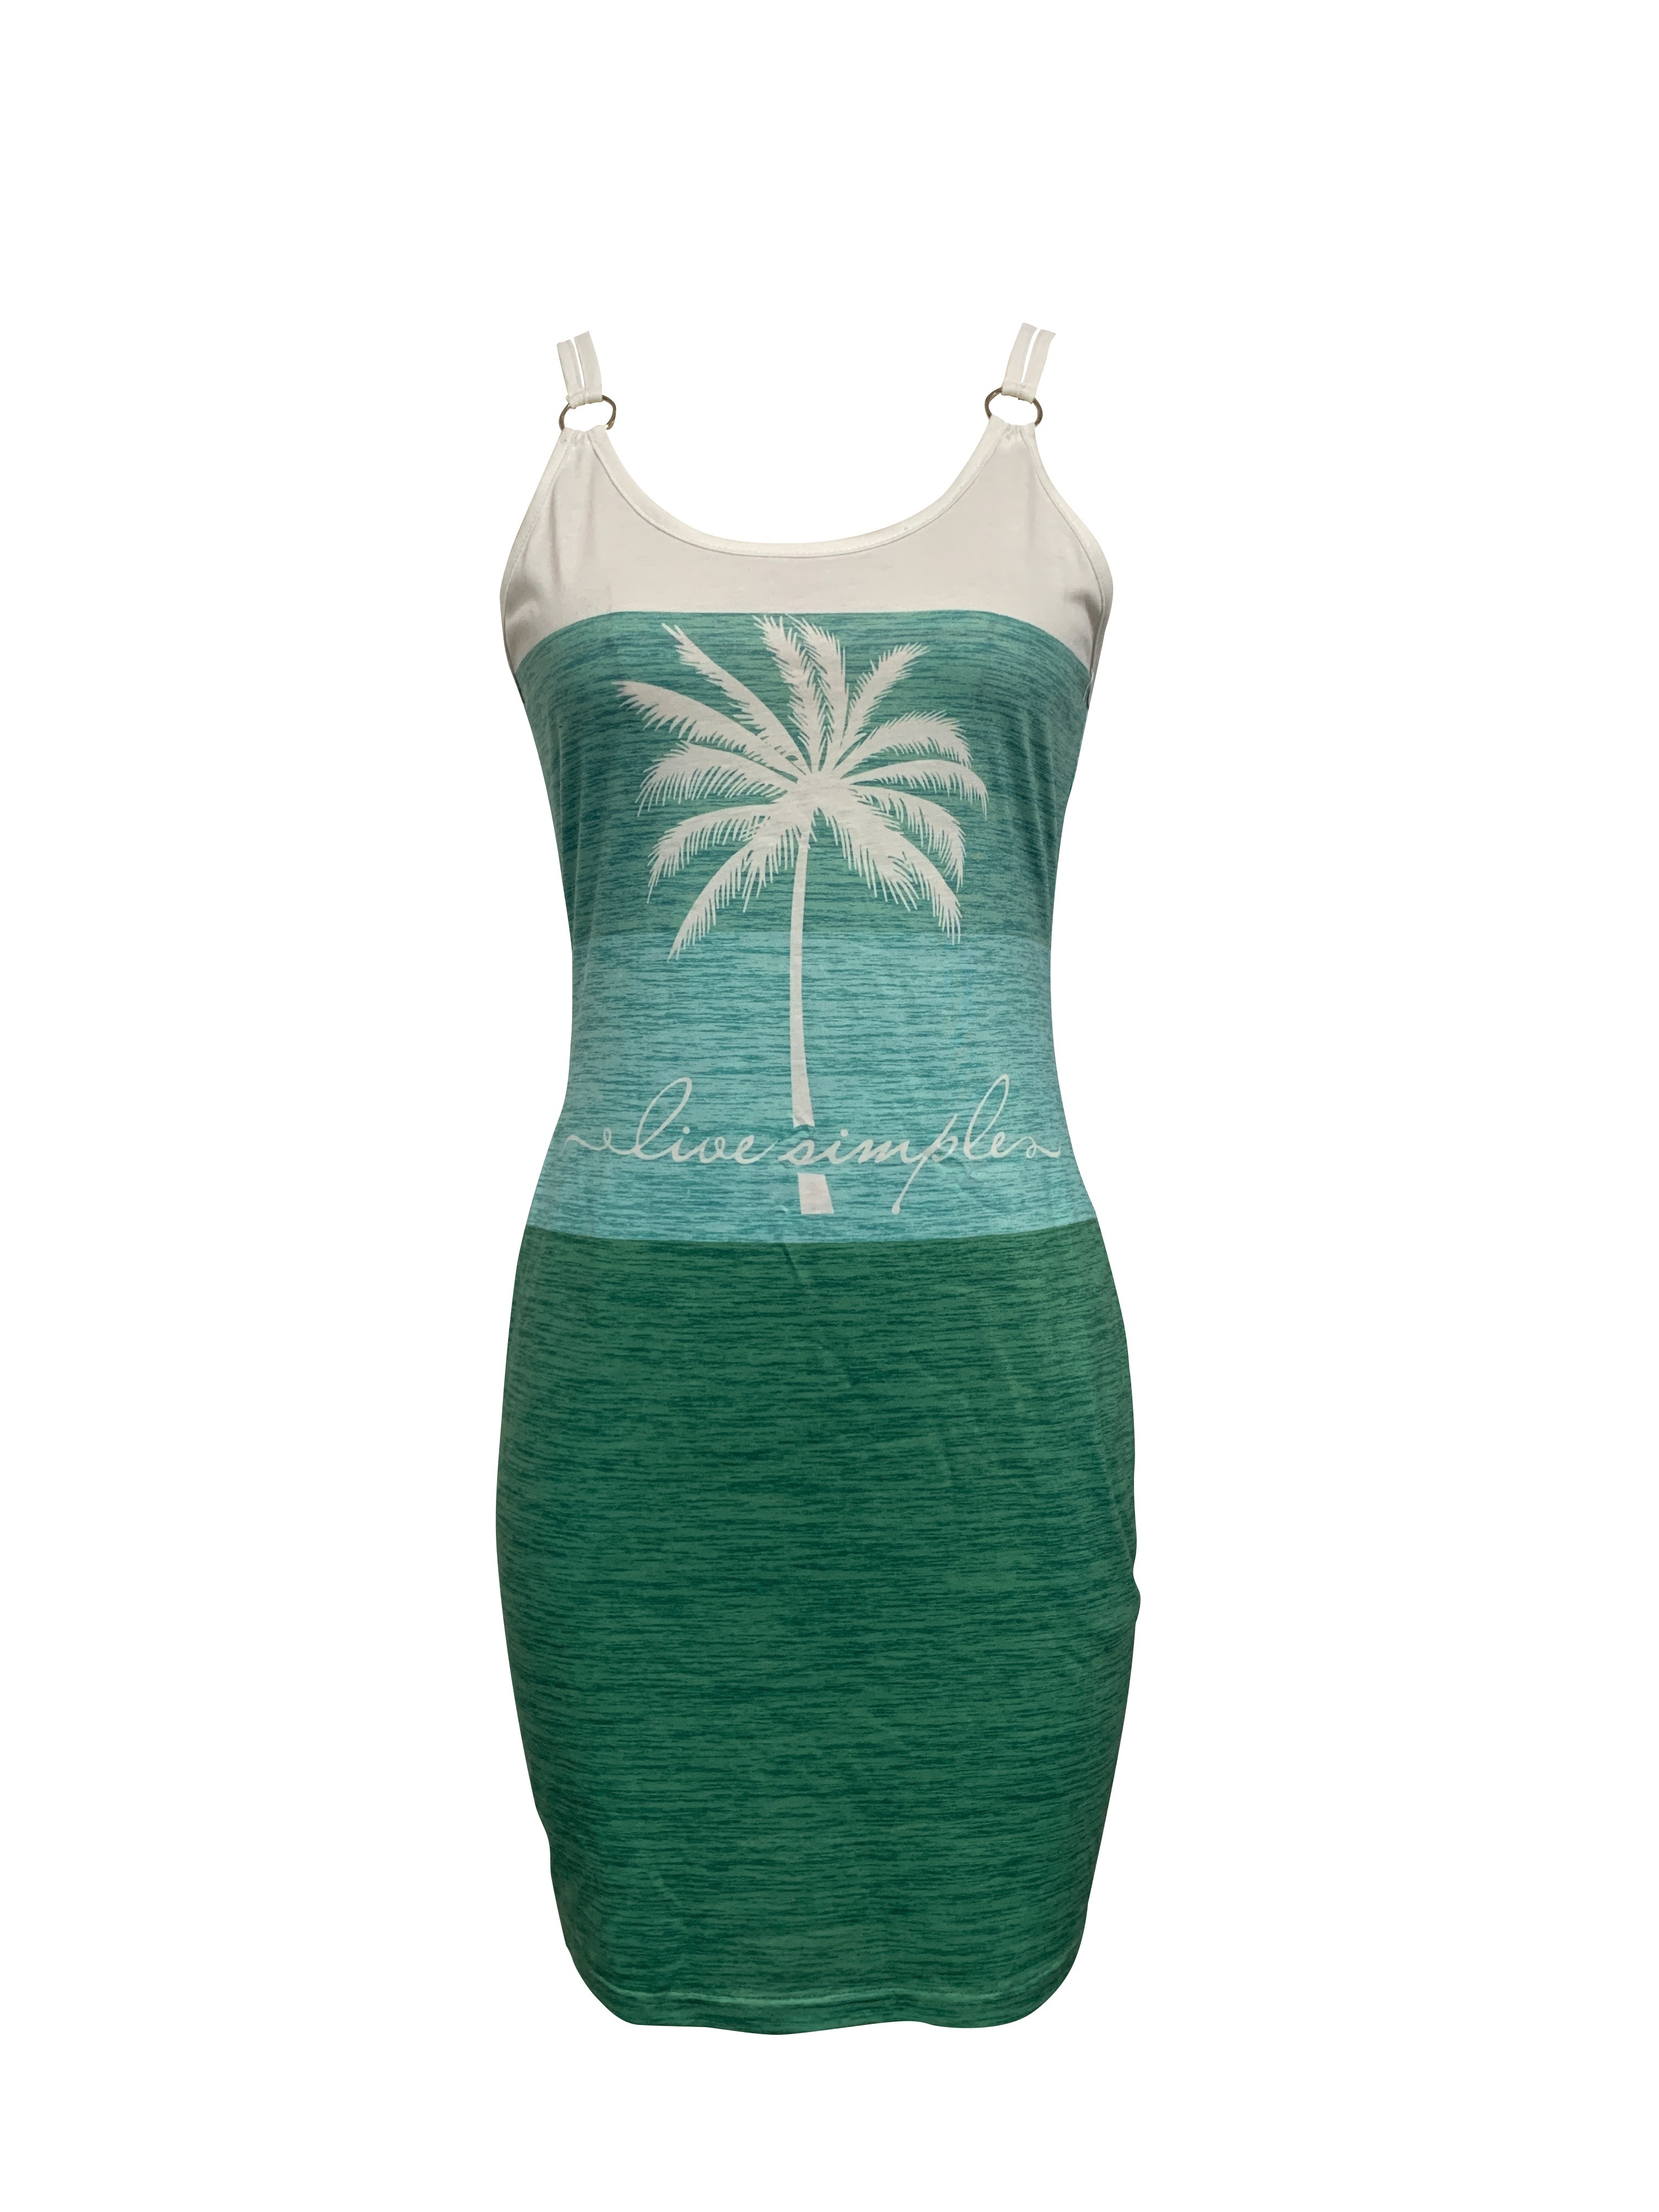 coconut tree print dress vacation ring linked sleeveless color block dress womens clothing details 14